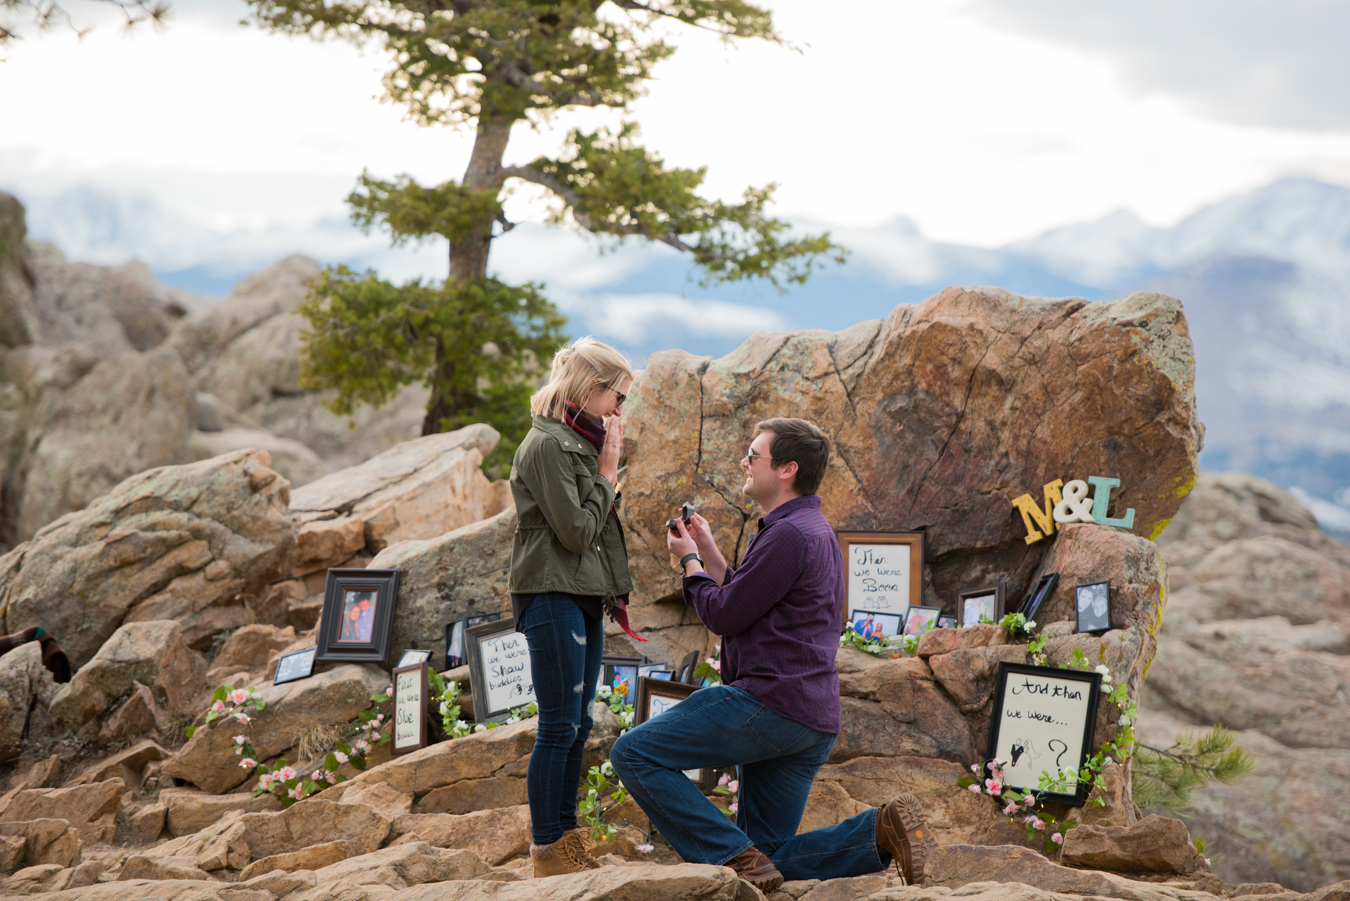 Choosing the Right Proposal Location